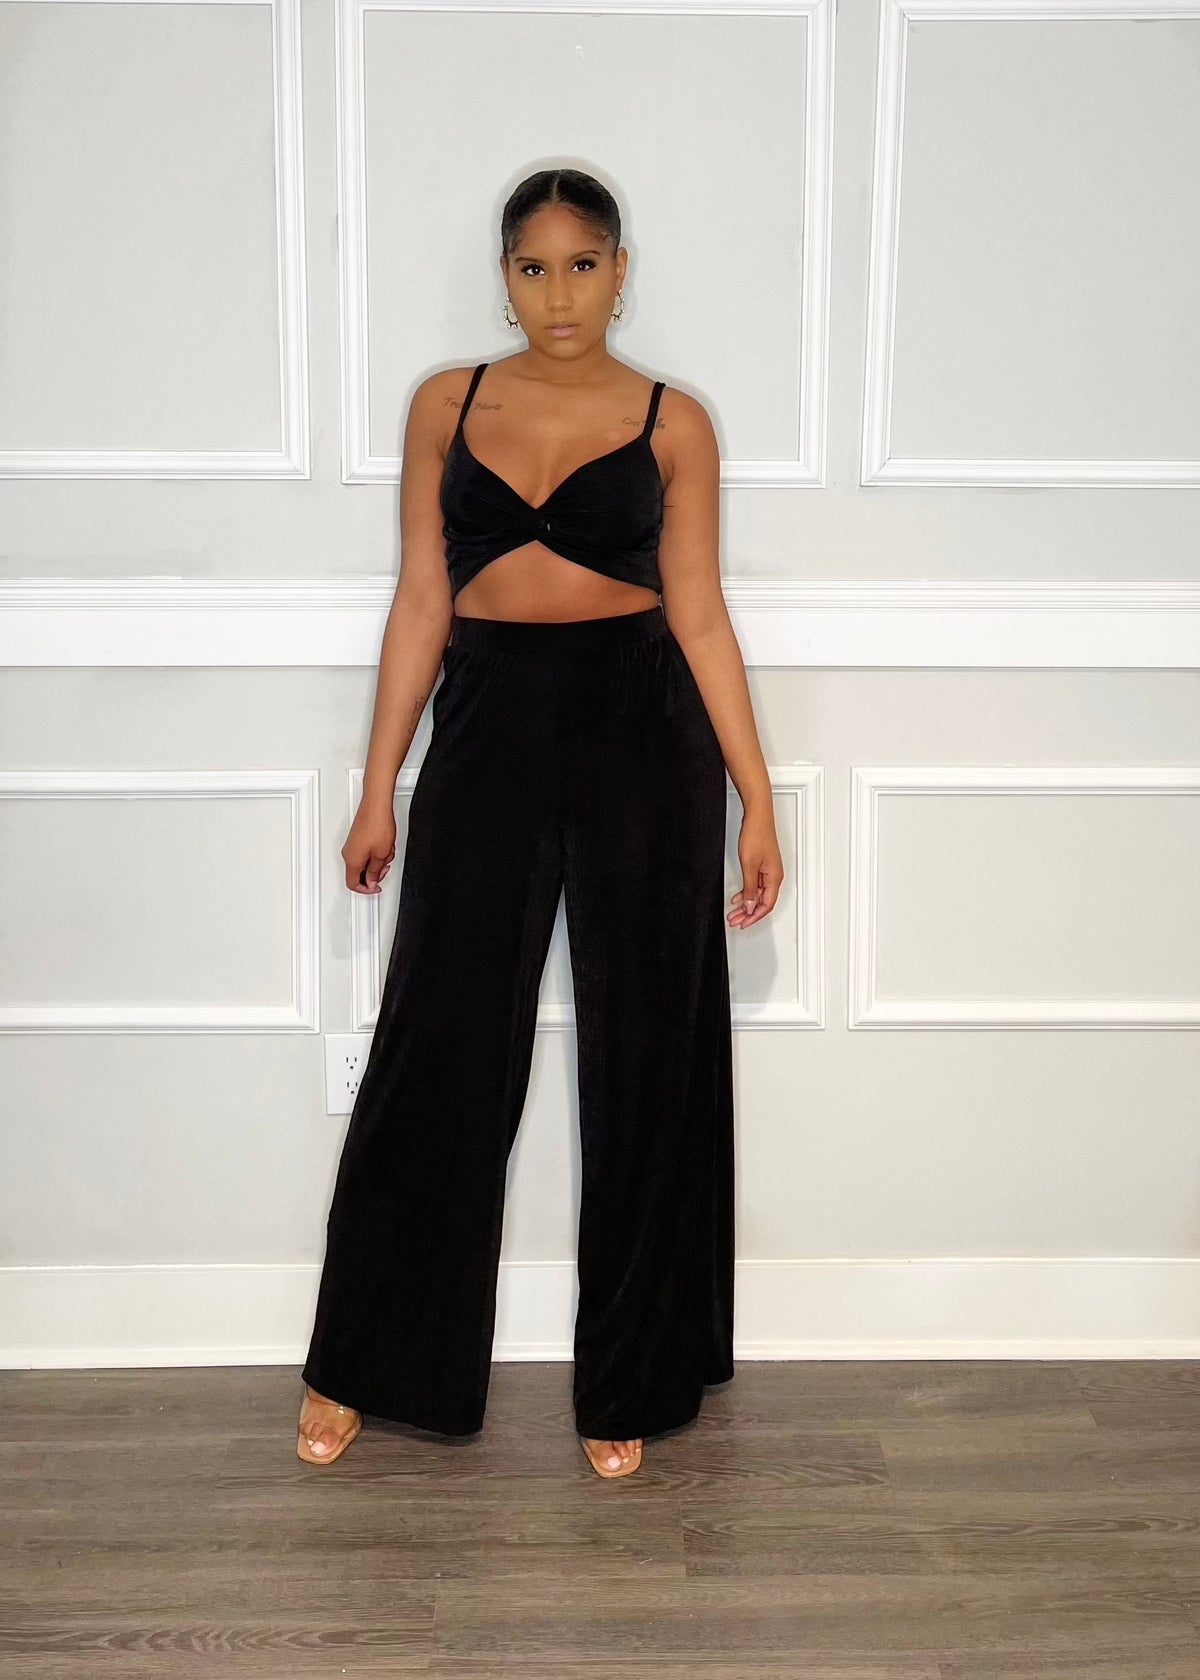 Get trendy with Boss Babe Black Pants Set - Sets available at ELLE TENAJ. Grab yours for $69.00 today!